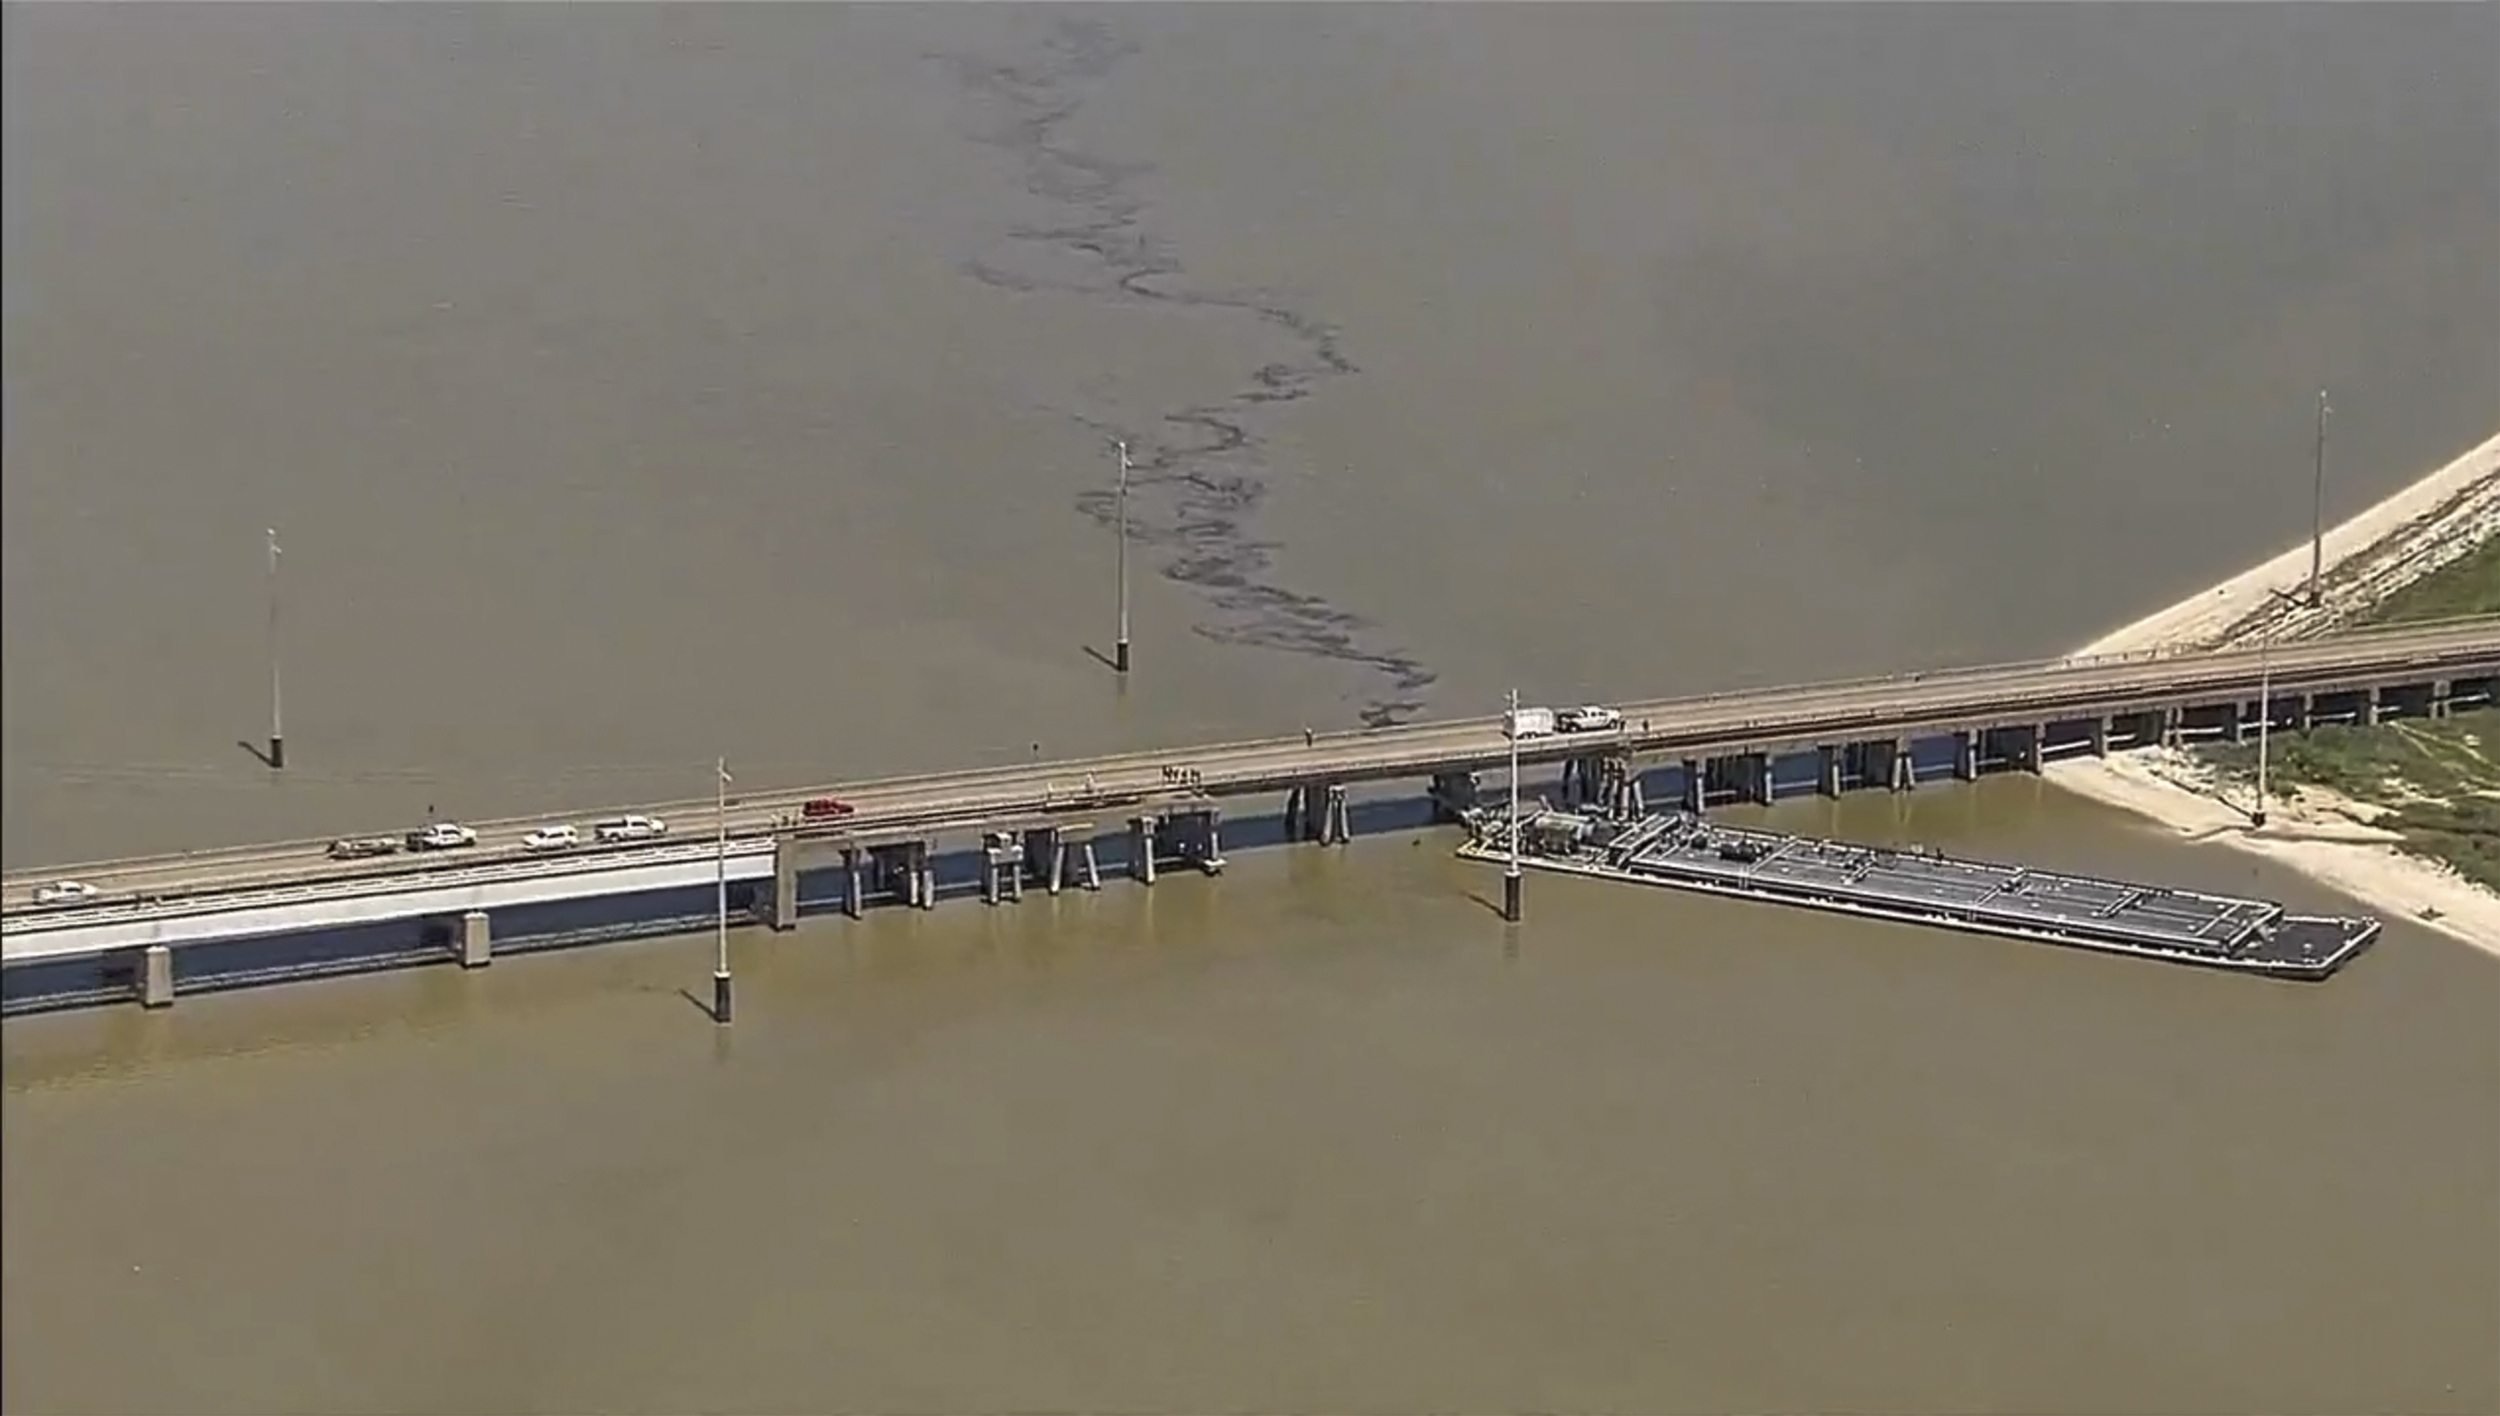 Boat strike causes oil spill, partial collapse of bridge in Texas